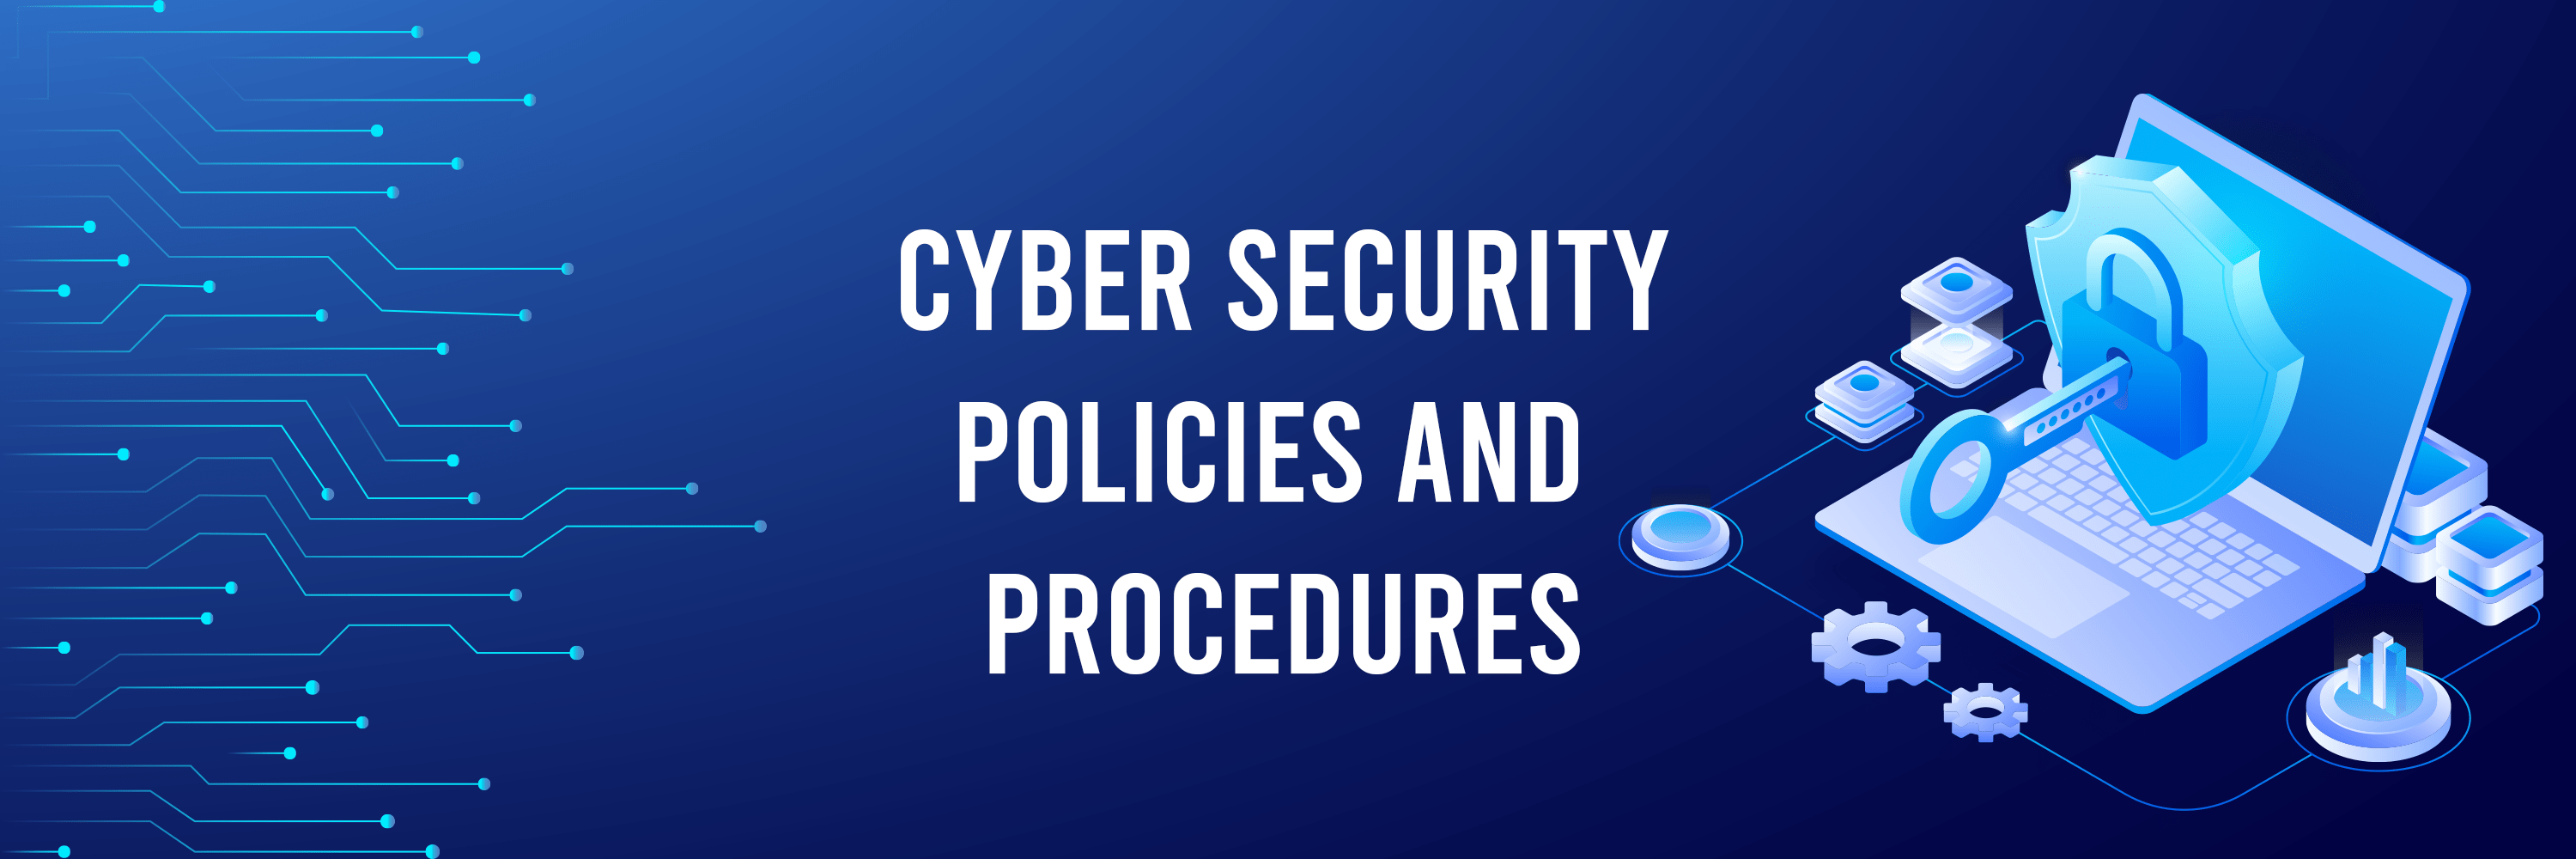 Review of Cyber Security Policies and Procedures Disa ICAI Project Report